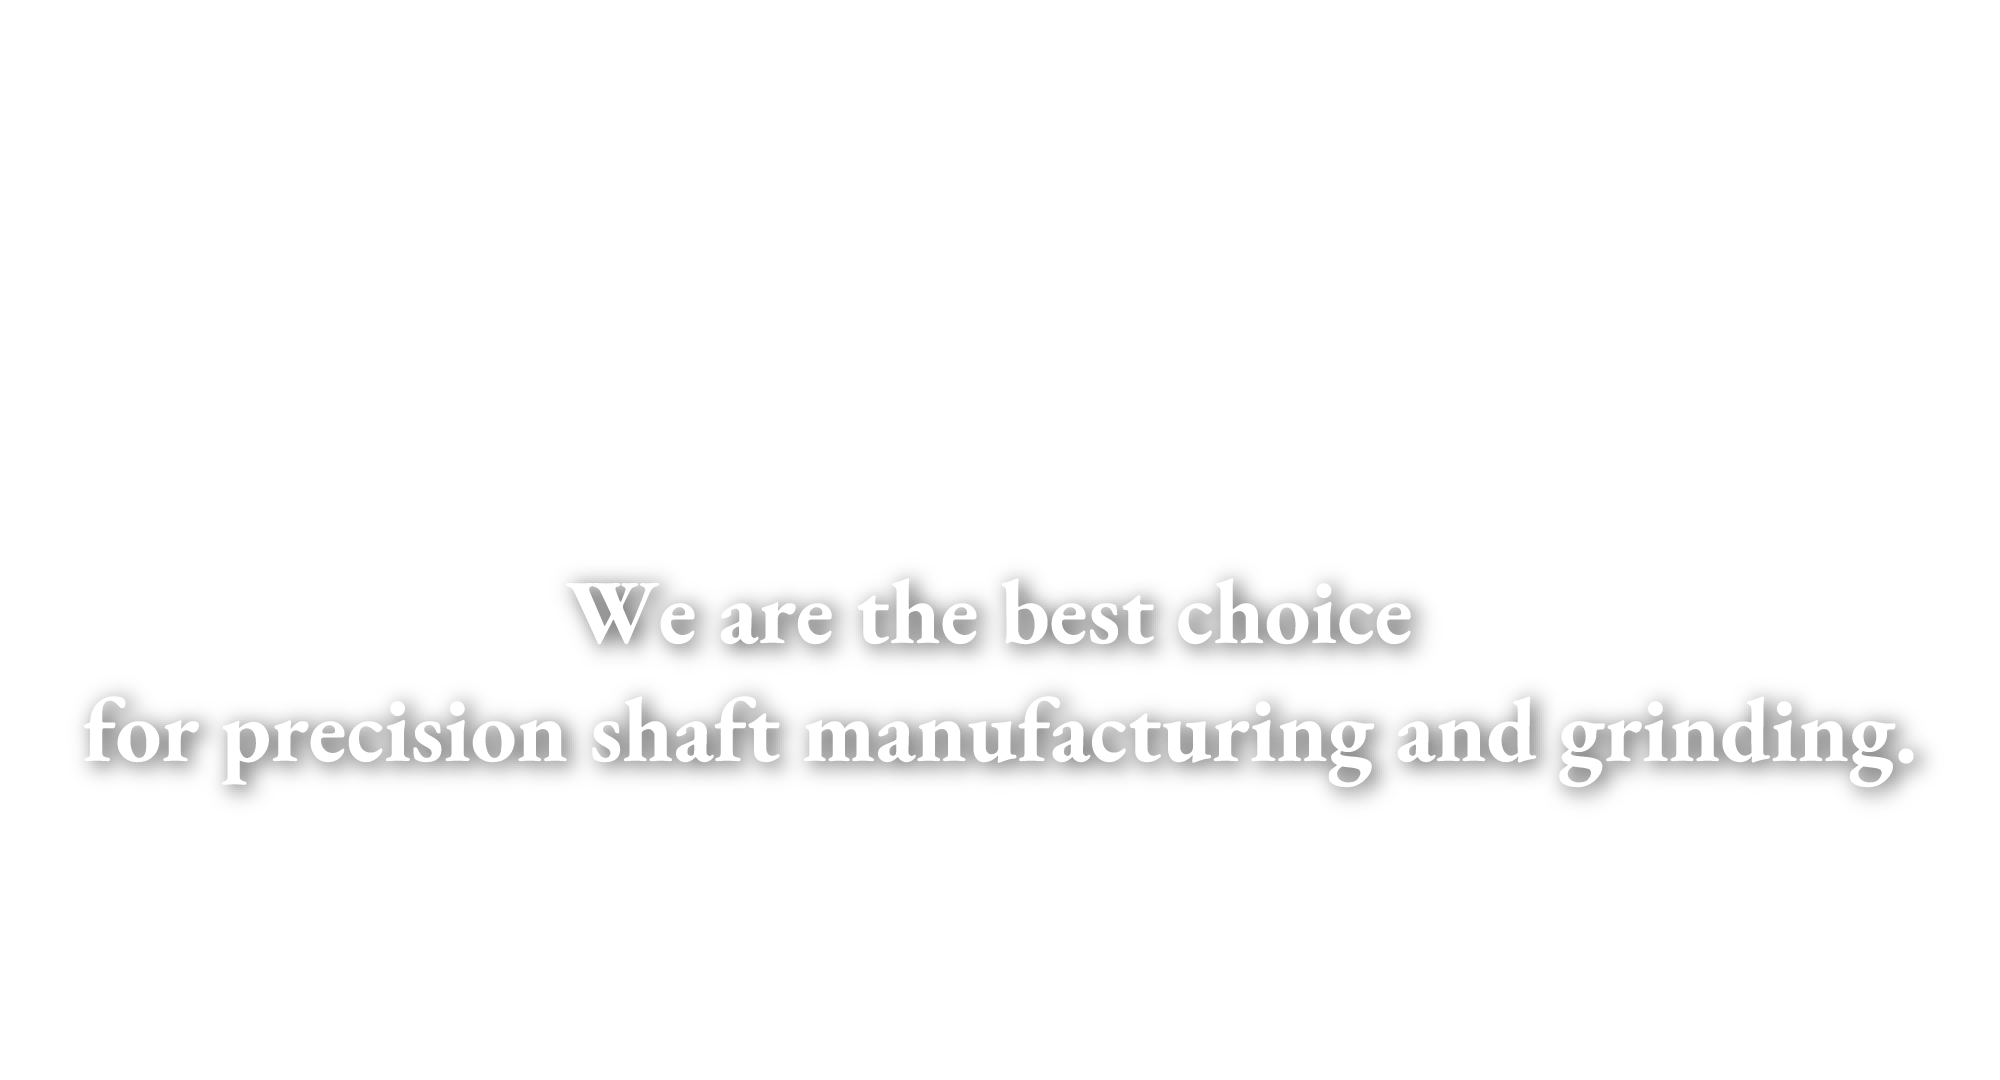 We are the best choice for precision shaft manufacturing and grinding.